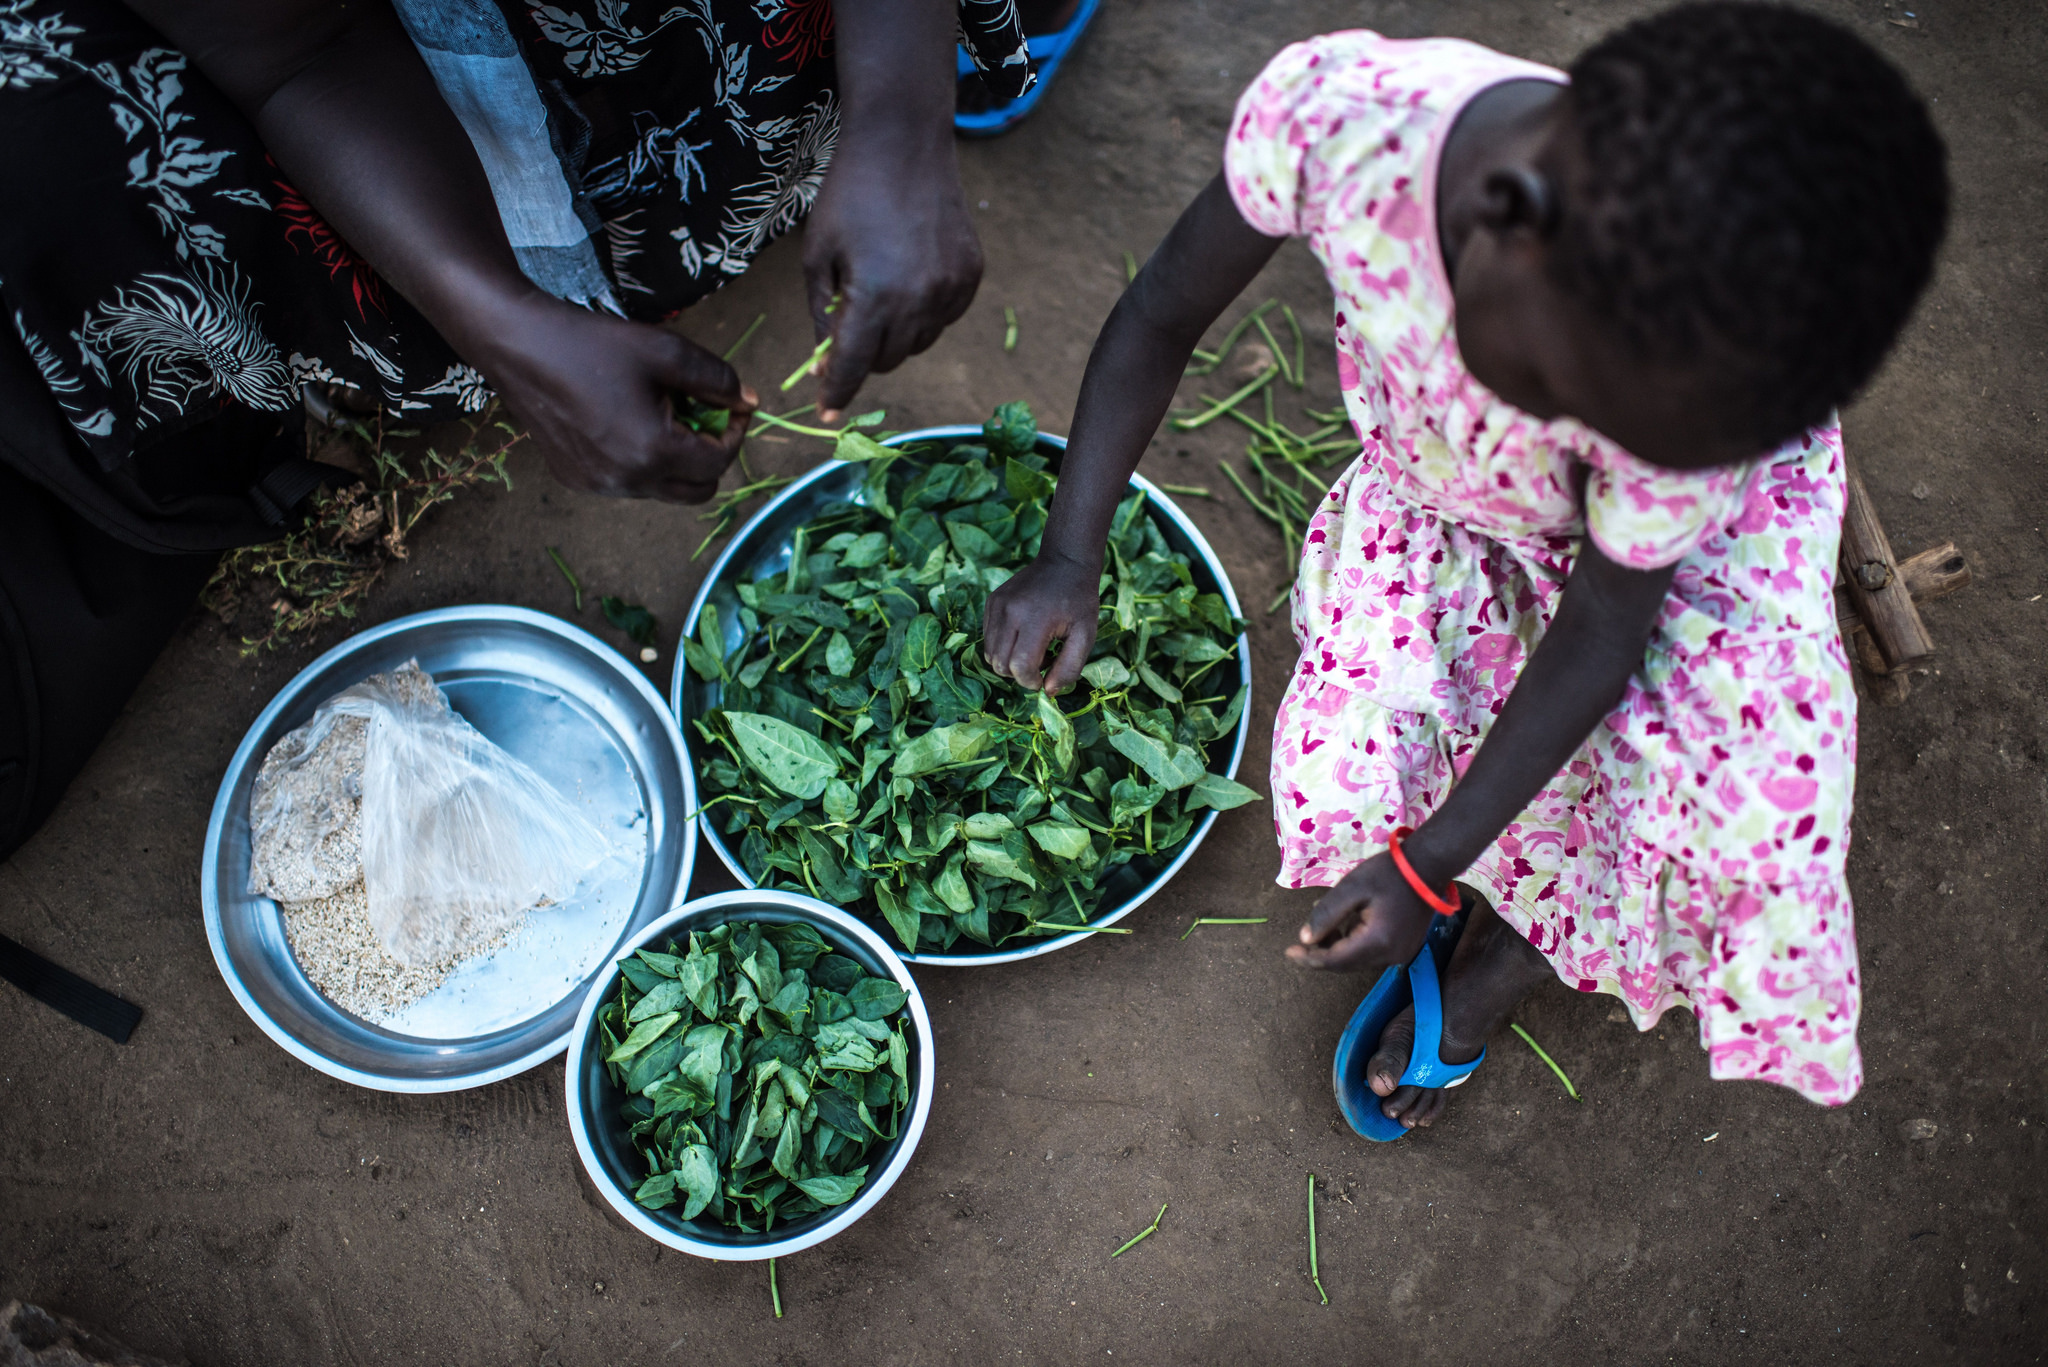 Beans and pea leaves grown by a refugee assisted by Caritas.